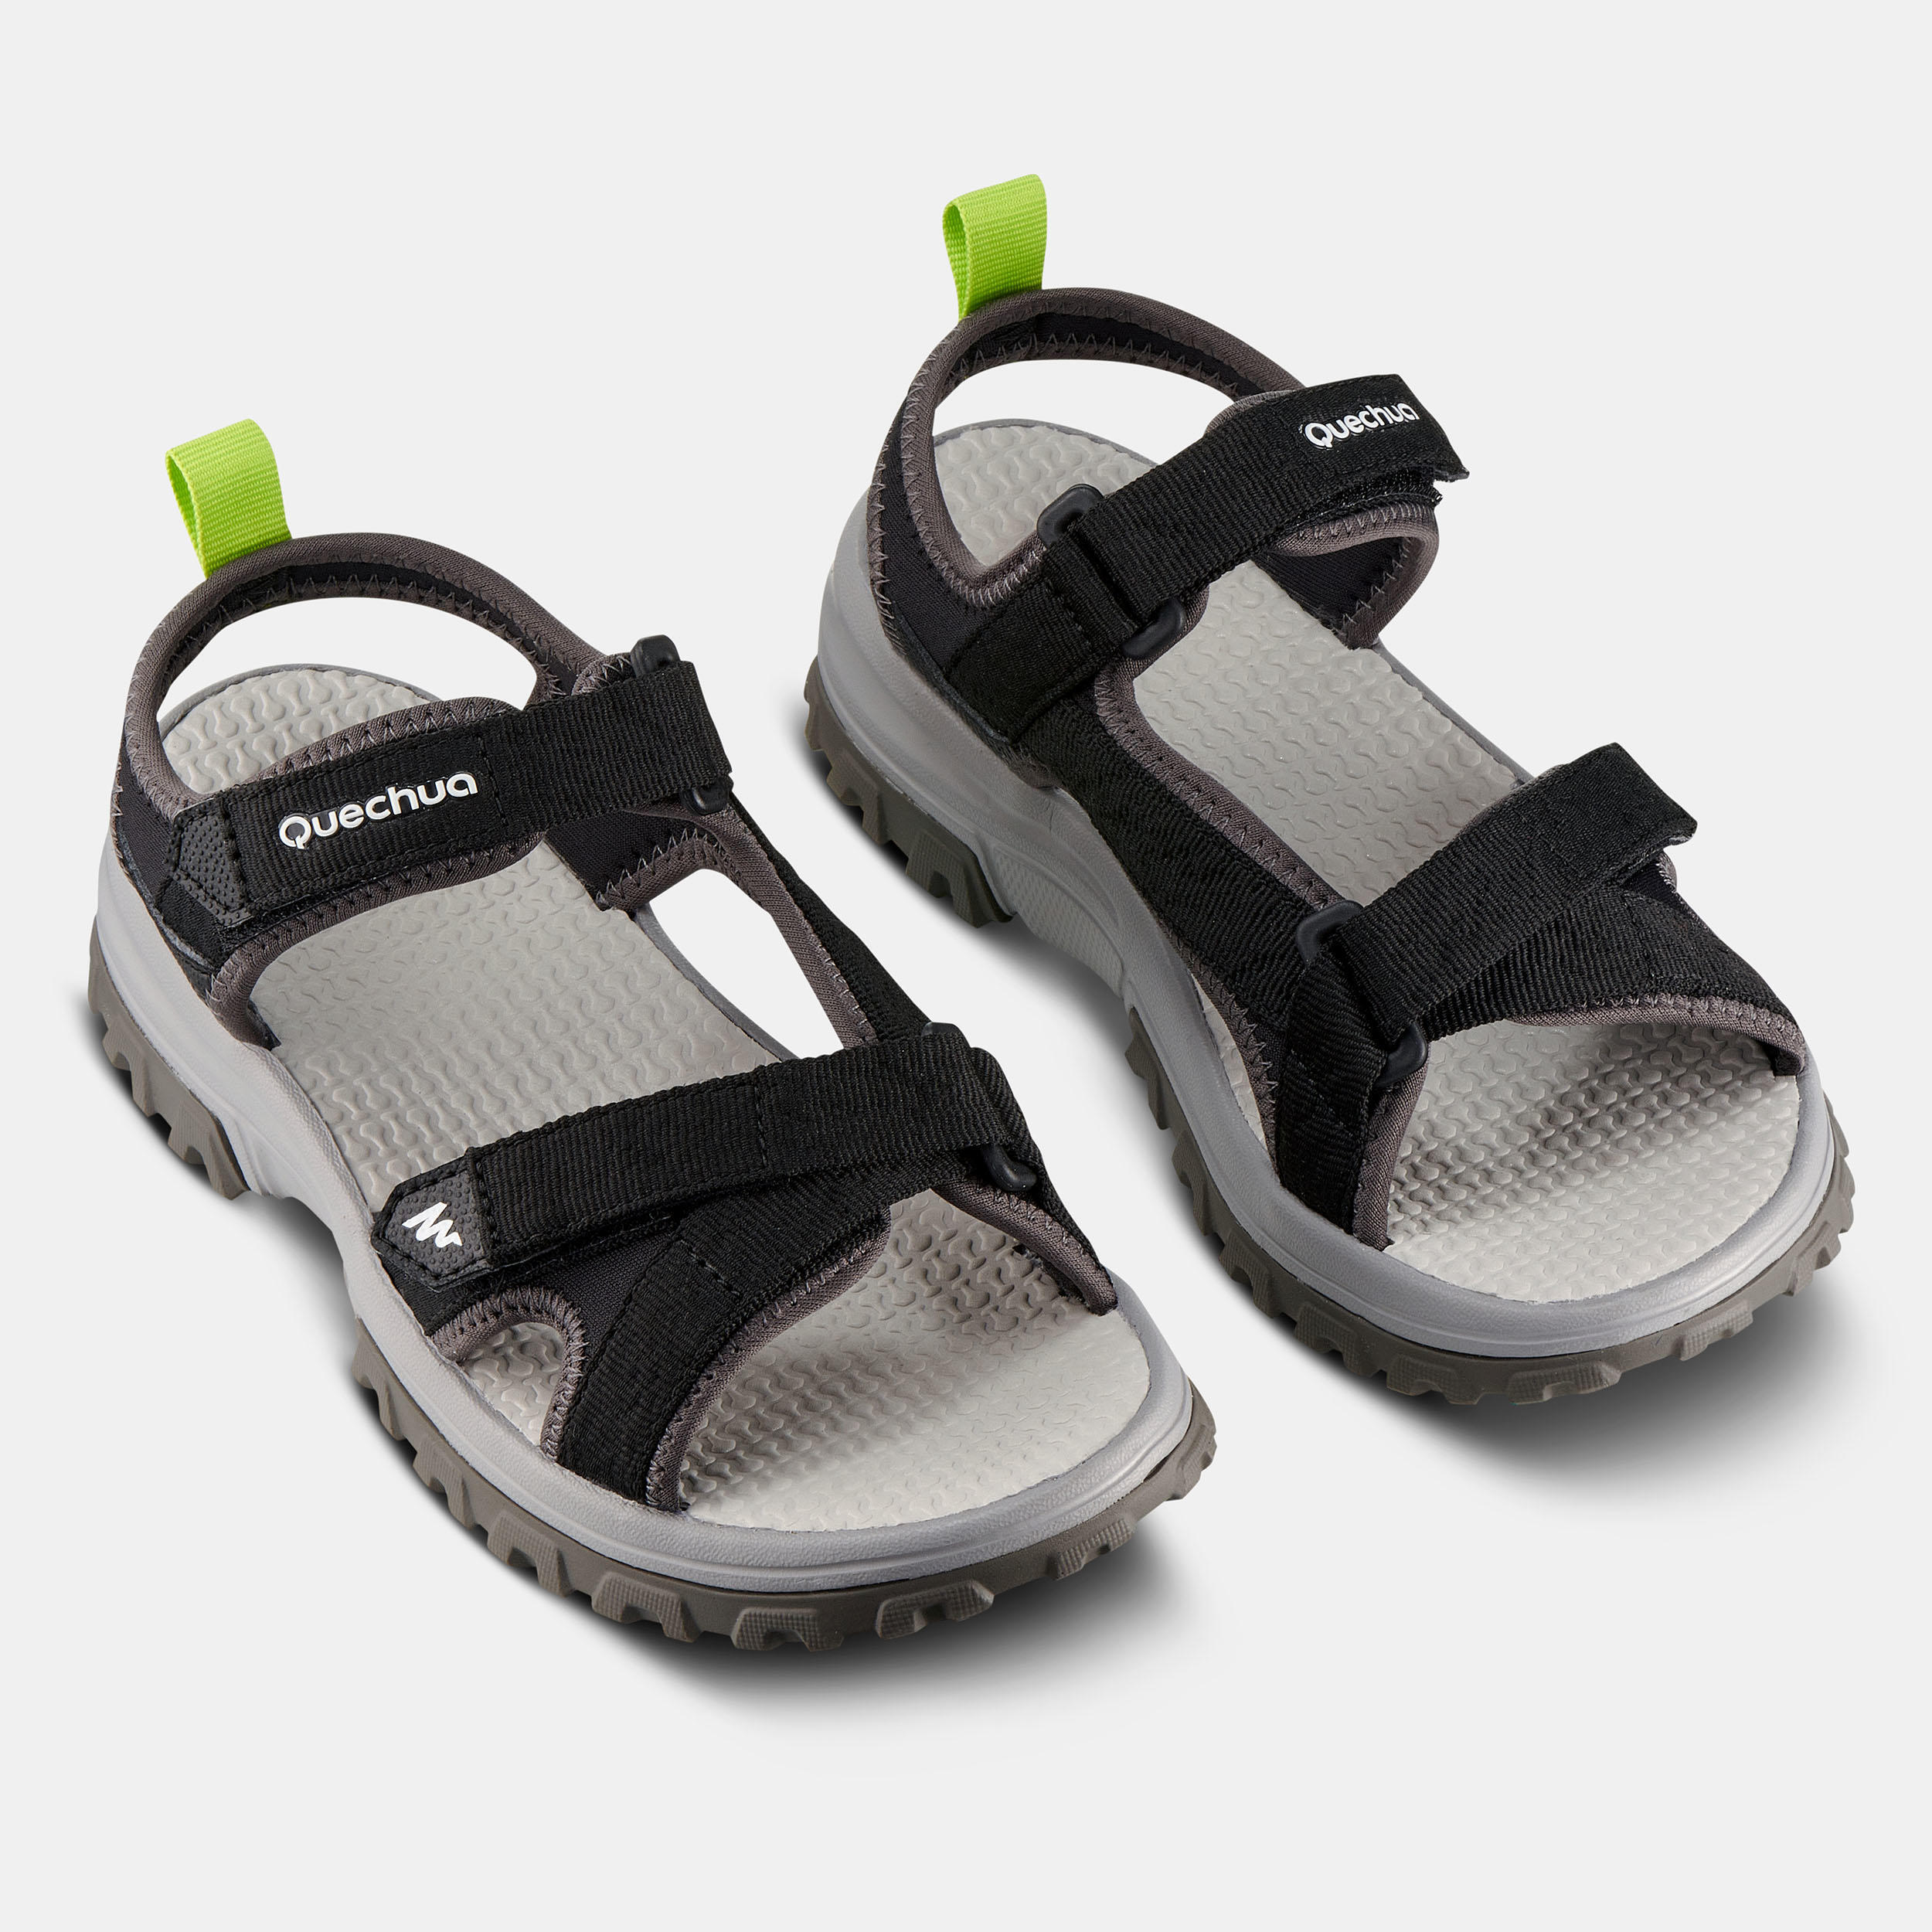 Kids’ Hiking Sandals MH120 TW  - Jr size 10 TO Adult size 6 - Black 4/6